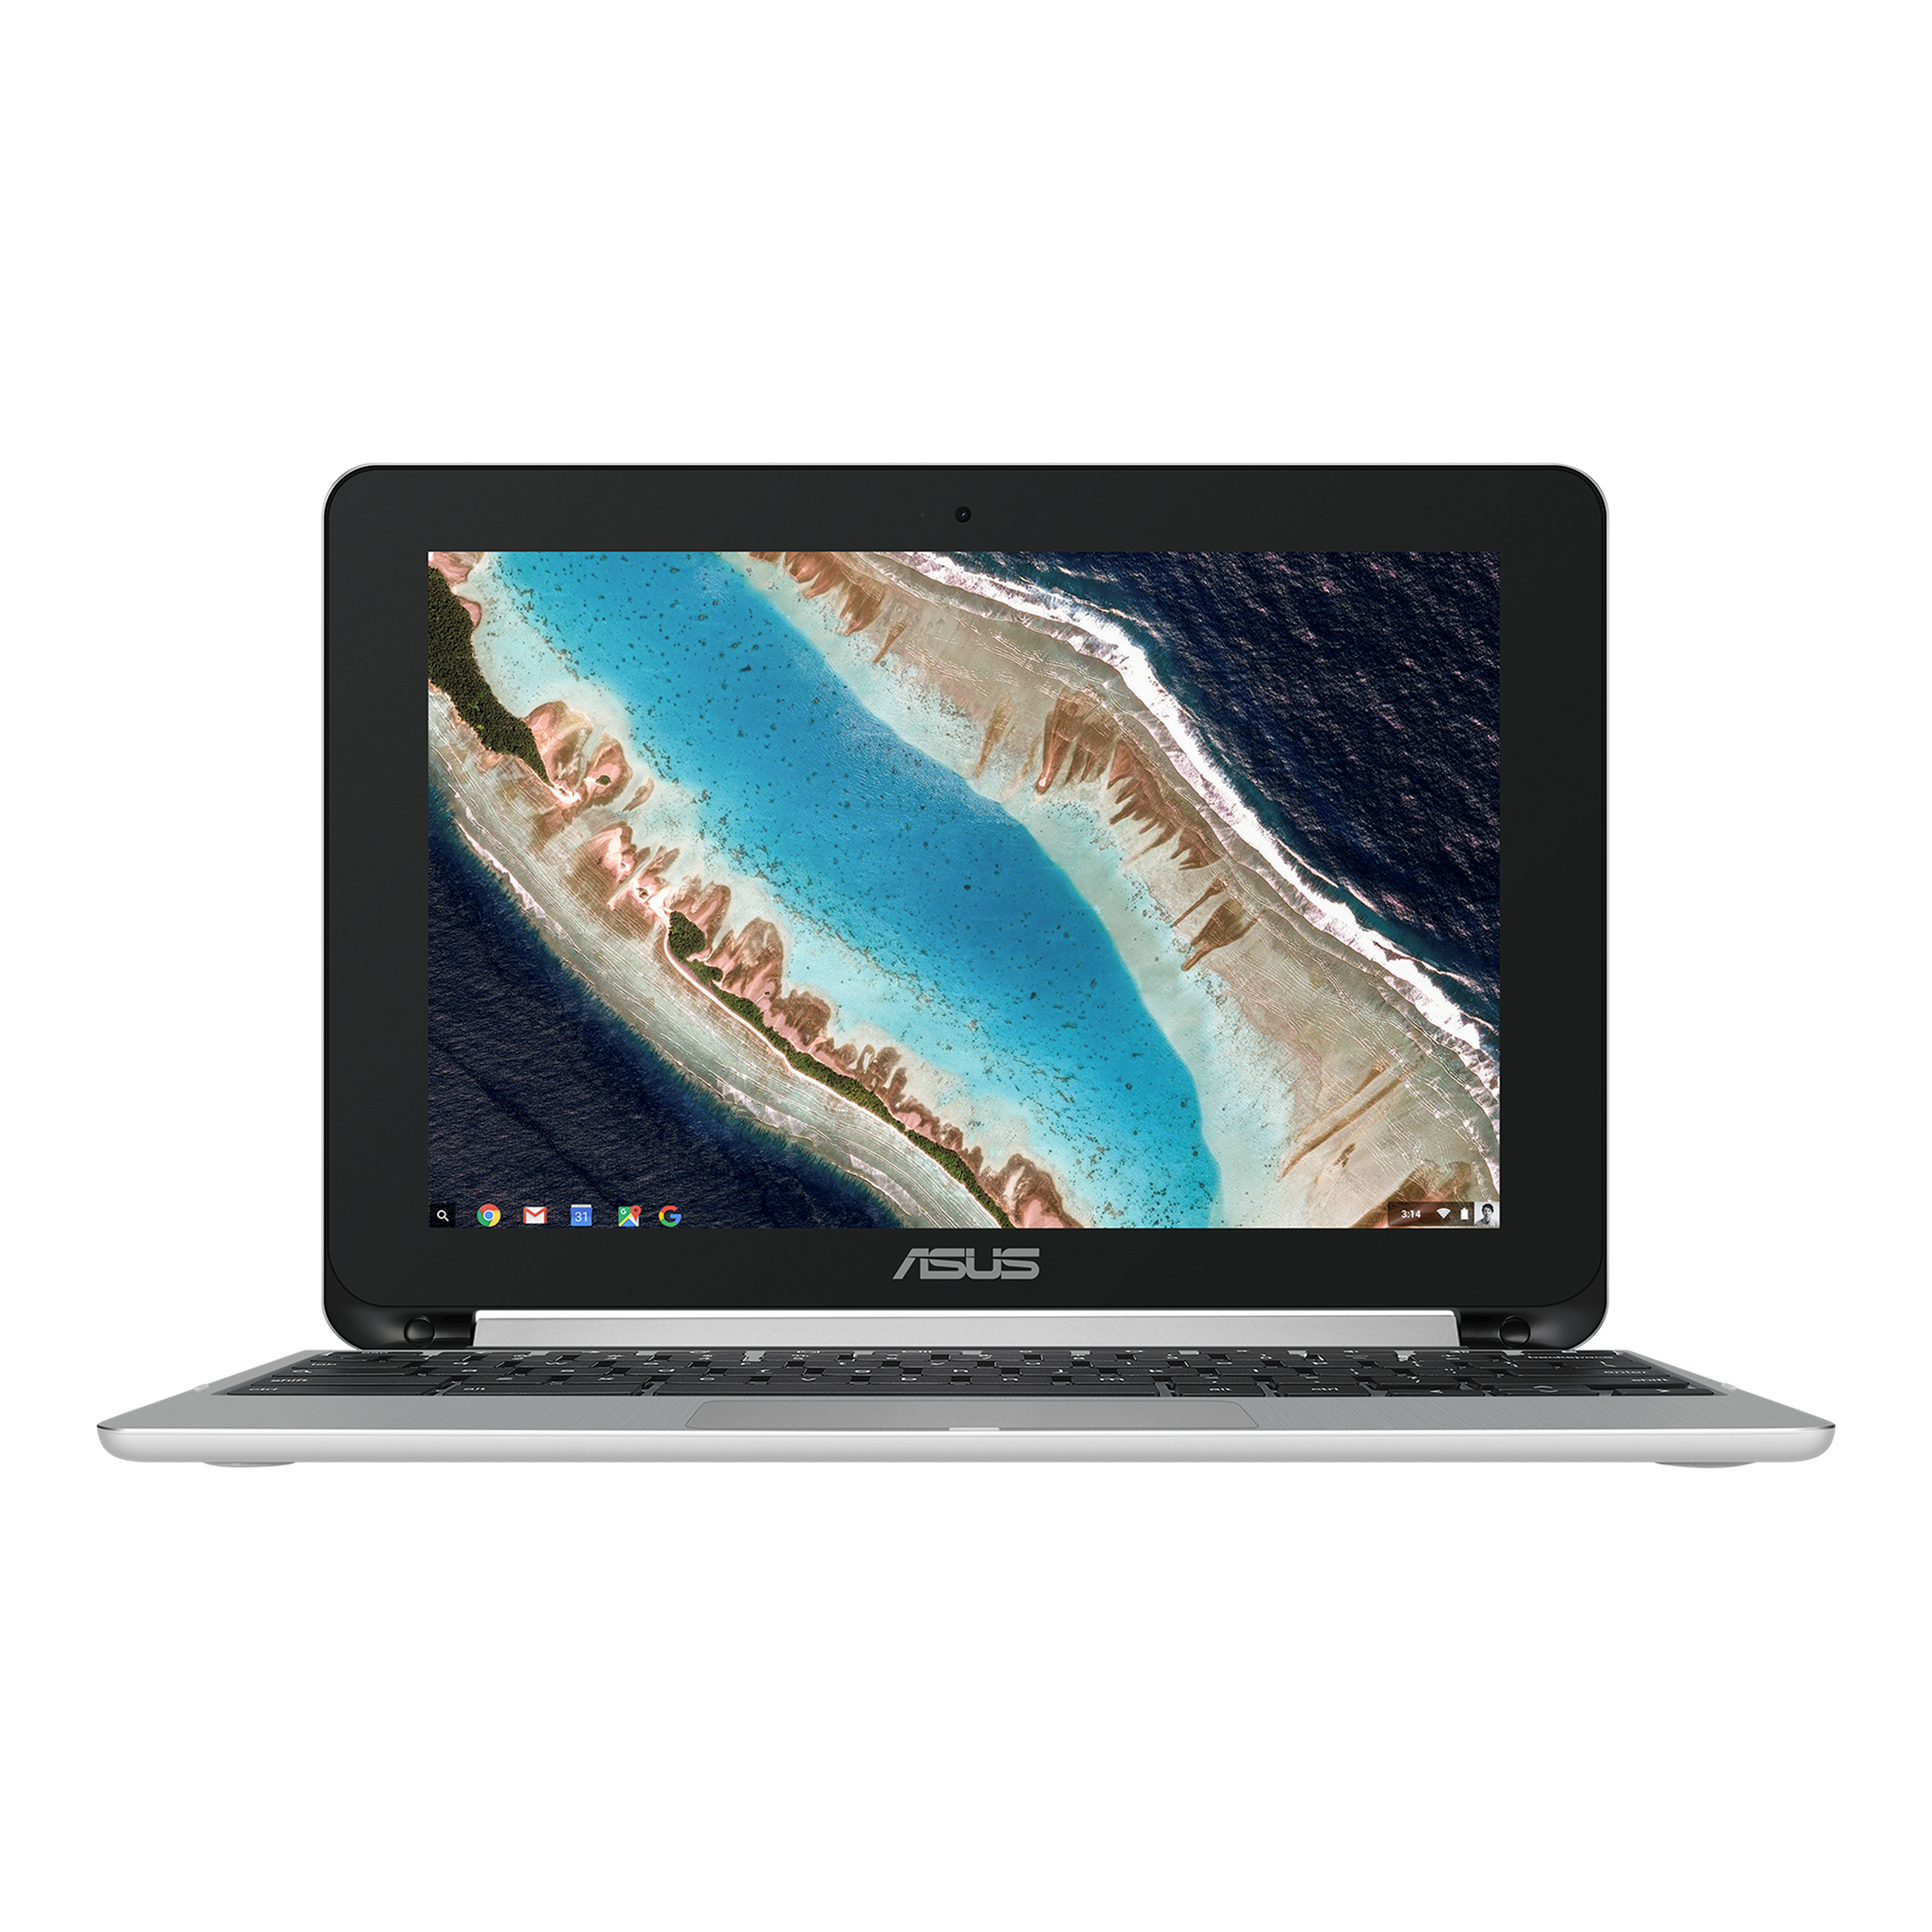 ASUS Chromebook Flip C101｜Laptops For Home｜ASUS USA